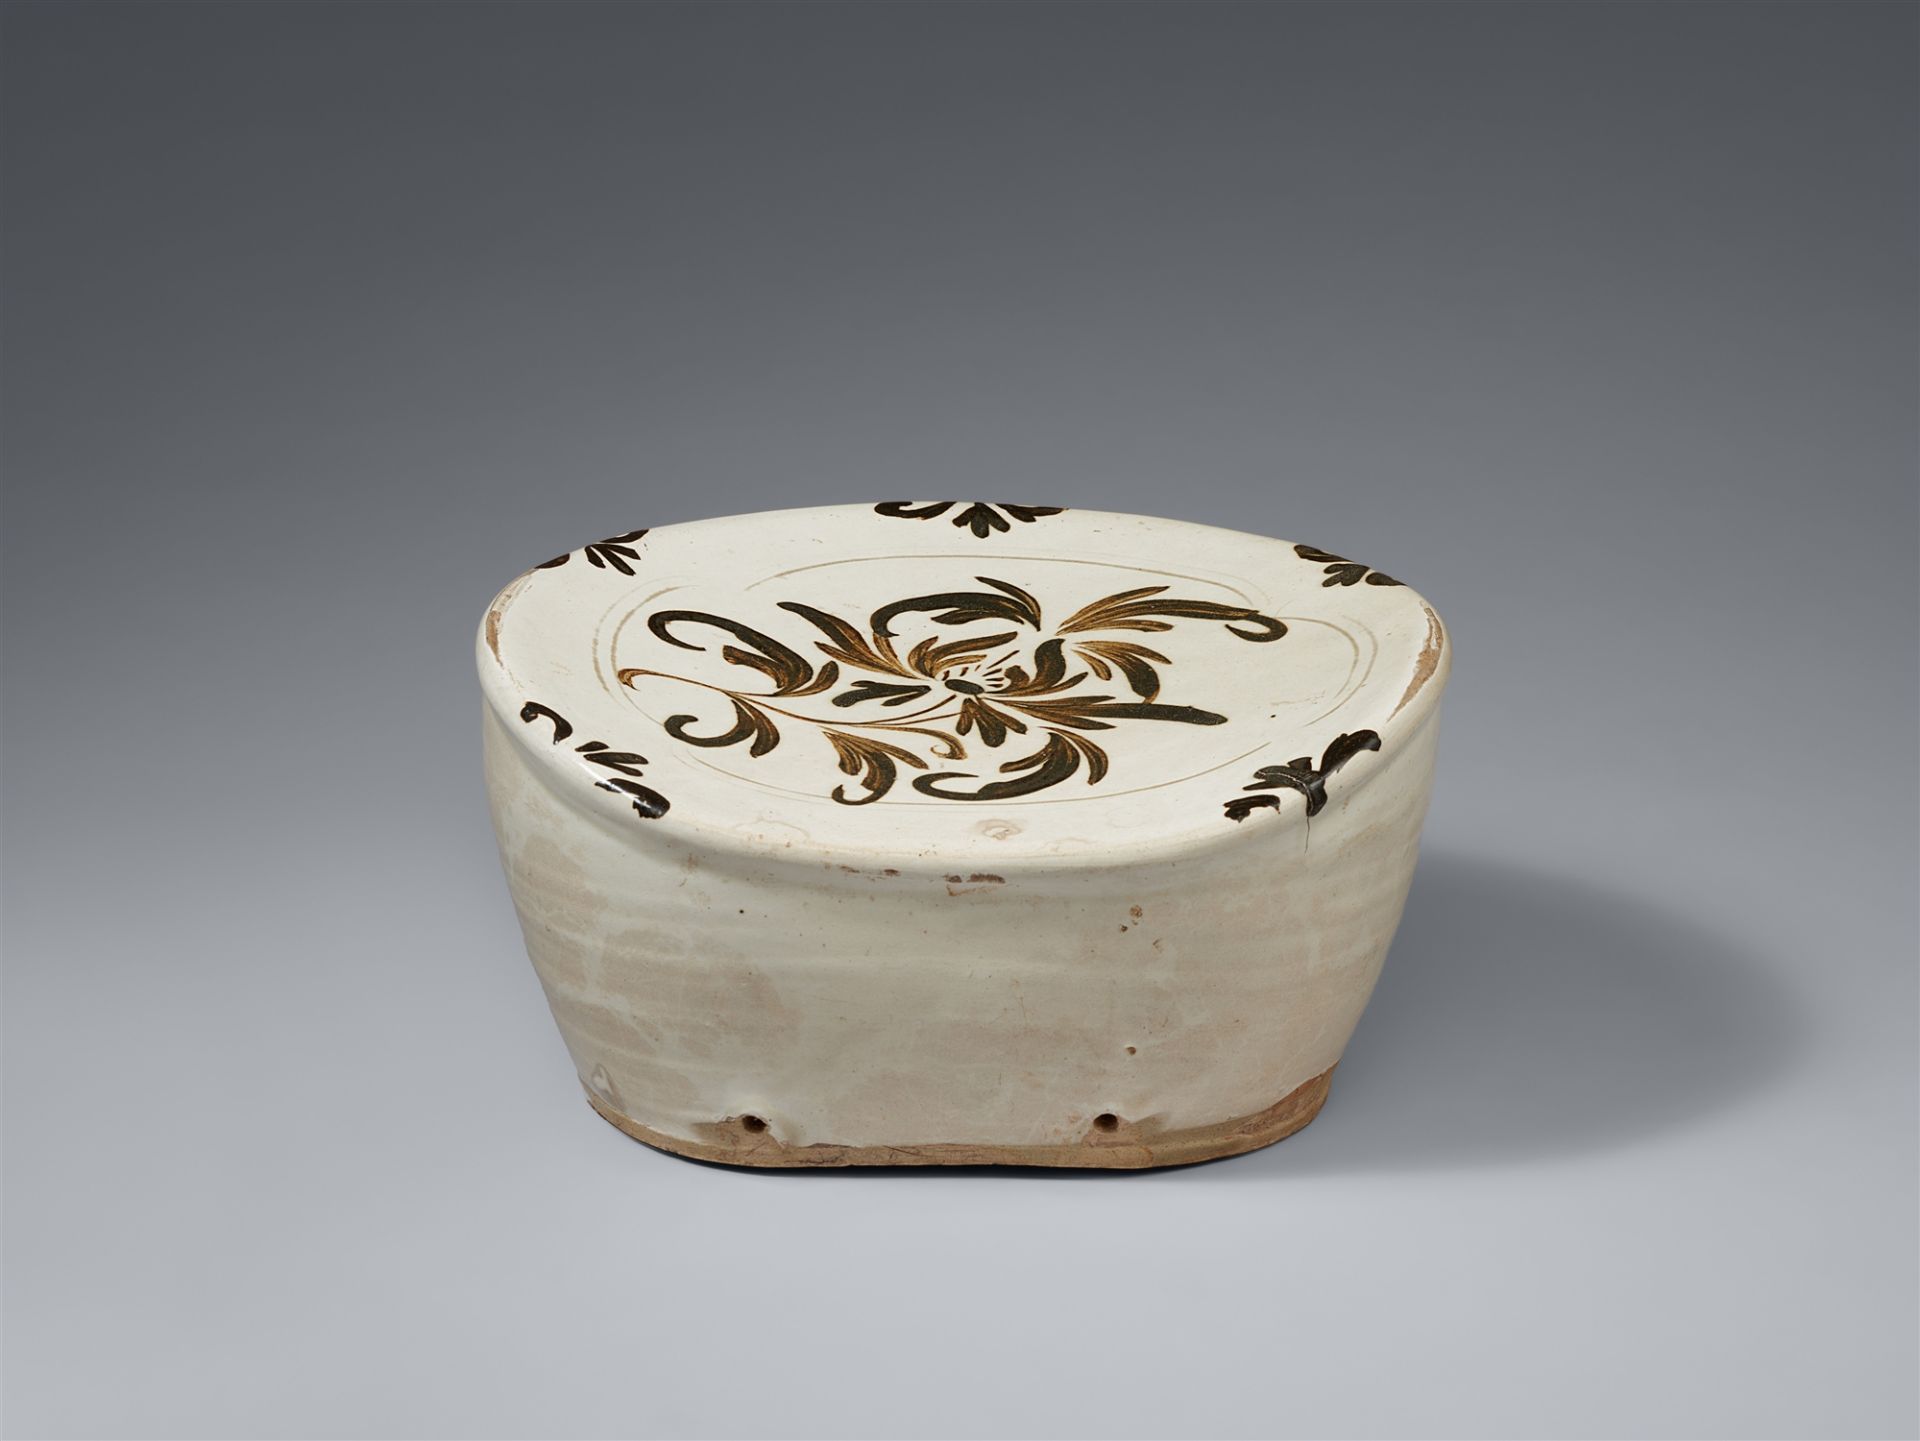 A Cizhou floral pilow. Northern Song/Jin dynasty, 12th/13th century